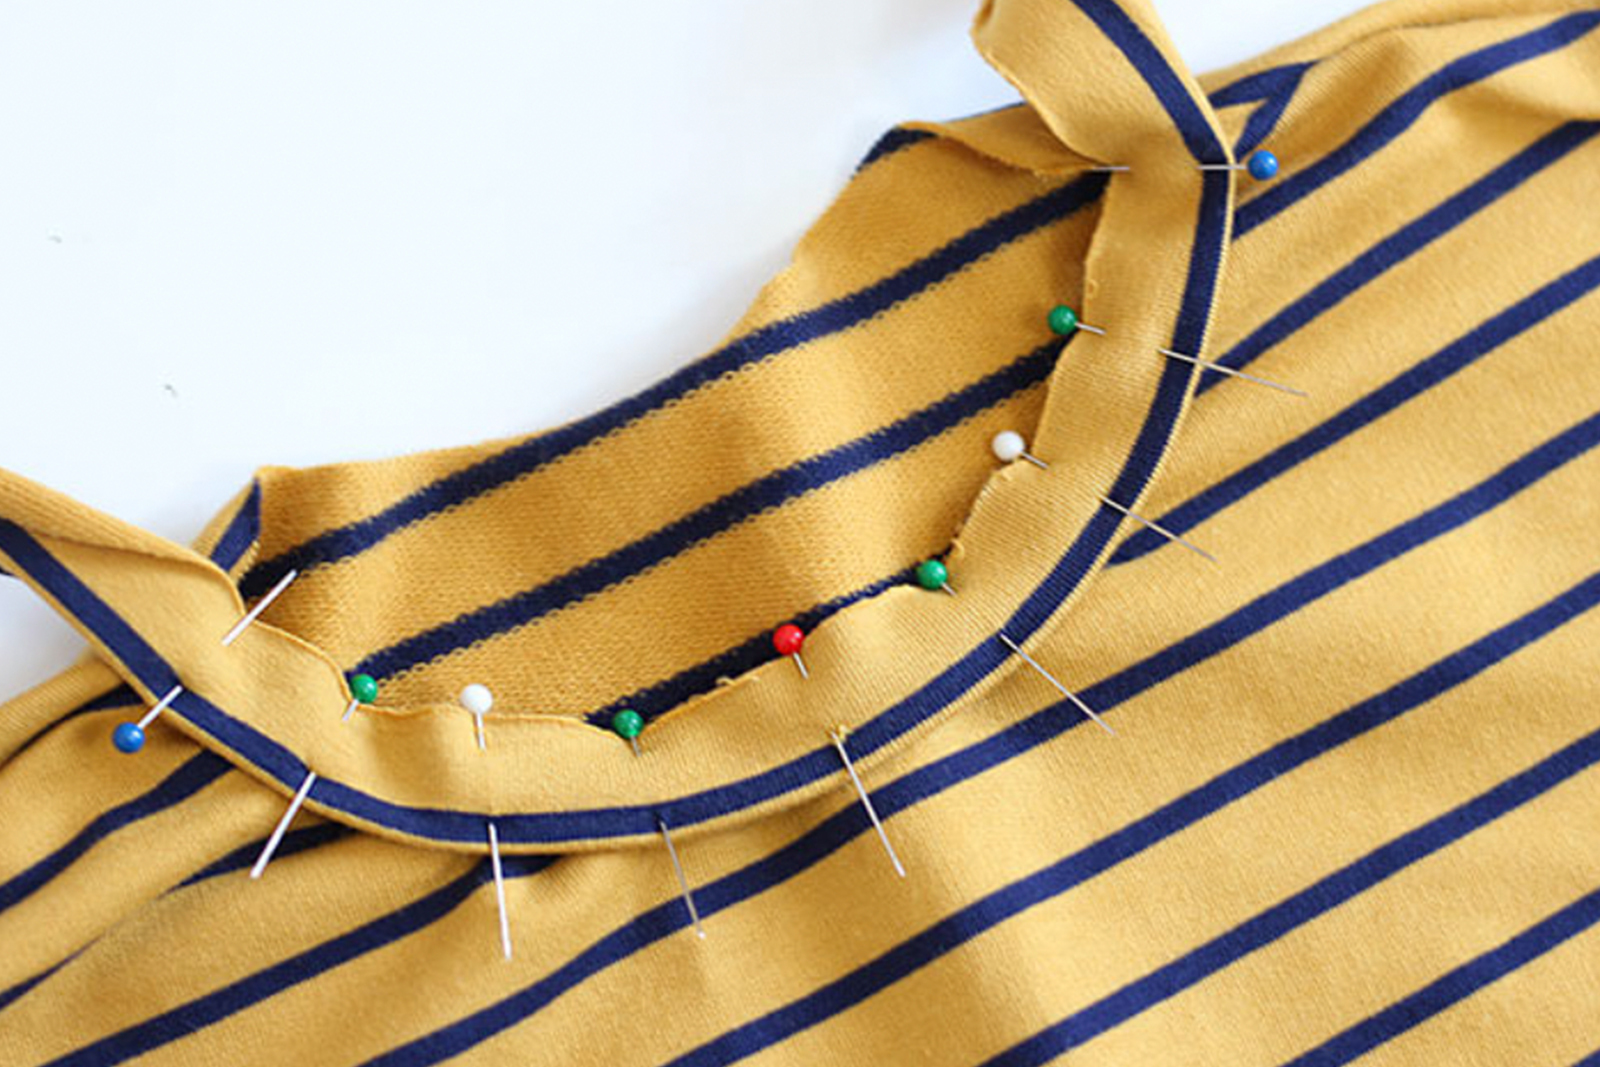 A sewn t shirt in progress with pins along the collar